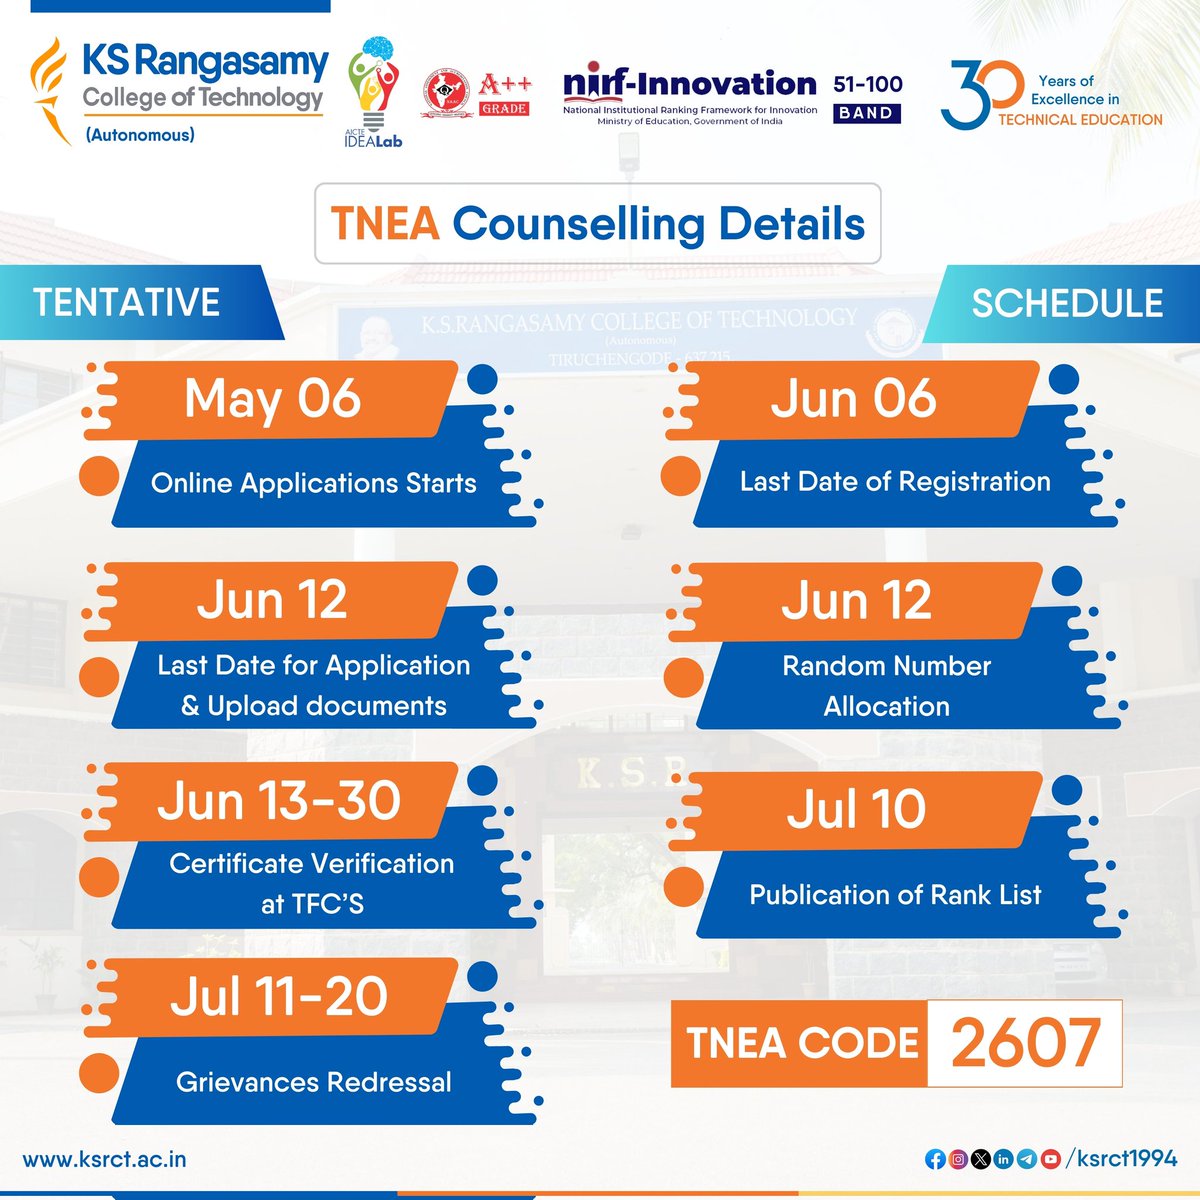 #TNEA2024 #TentativeSchedule #Counselling #ImportantDates #KSRCTians #MakingADifference #admission #admissions #education #collegeadmissions #admissionsopen #TNEACounselling #students #engineering #placement #enrollnow #btech #college #TNEA #TNEA2607 #Scholarships #ksrct1994